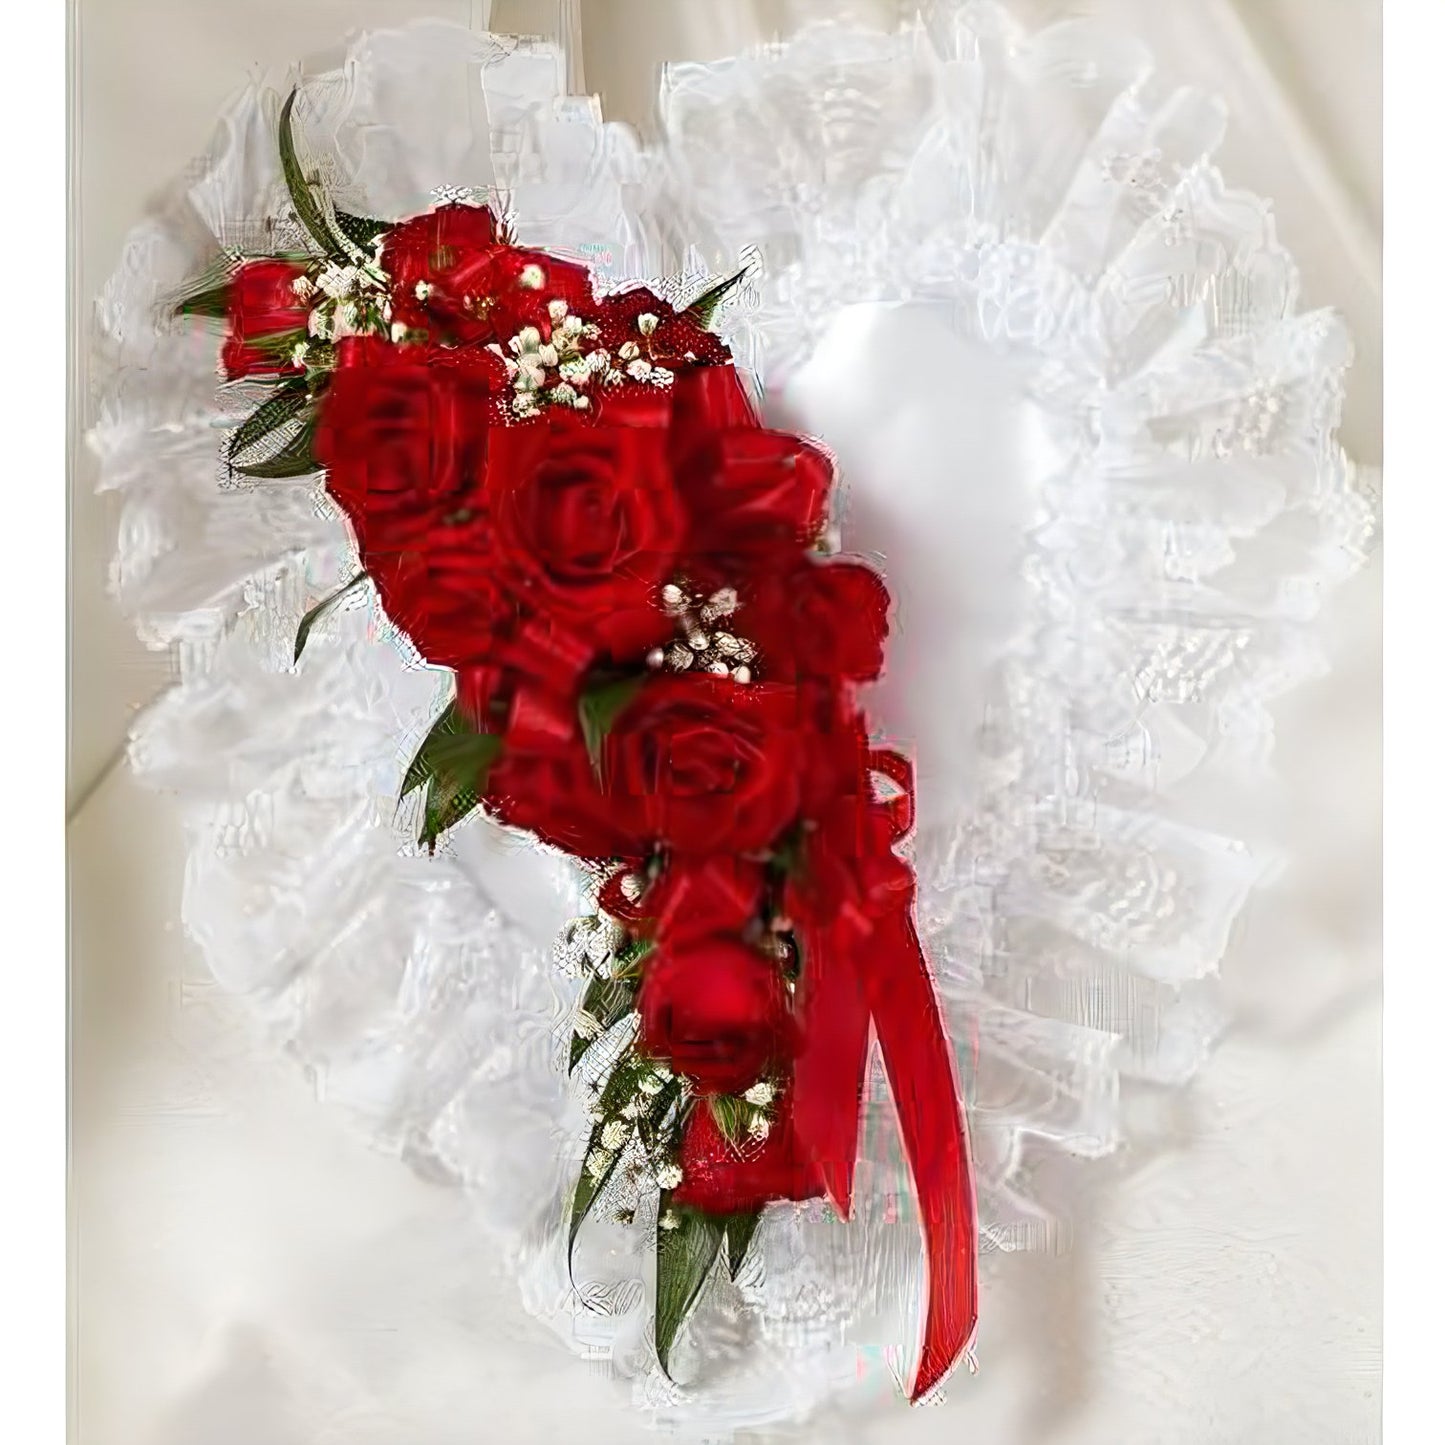 Red and White Satin Heart Casket Pillow - Floral_Arrangement - Flower Delivery NYC